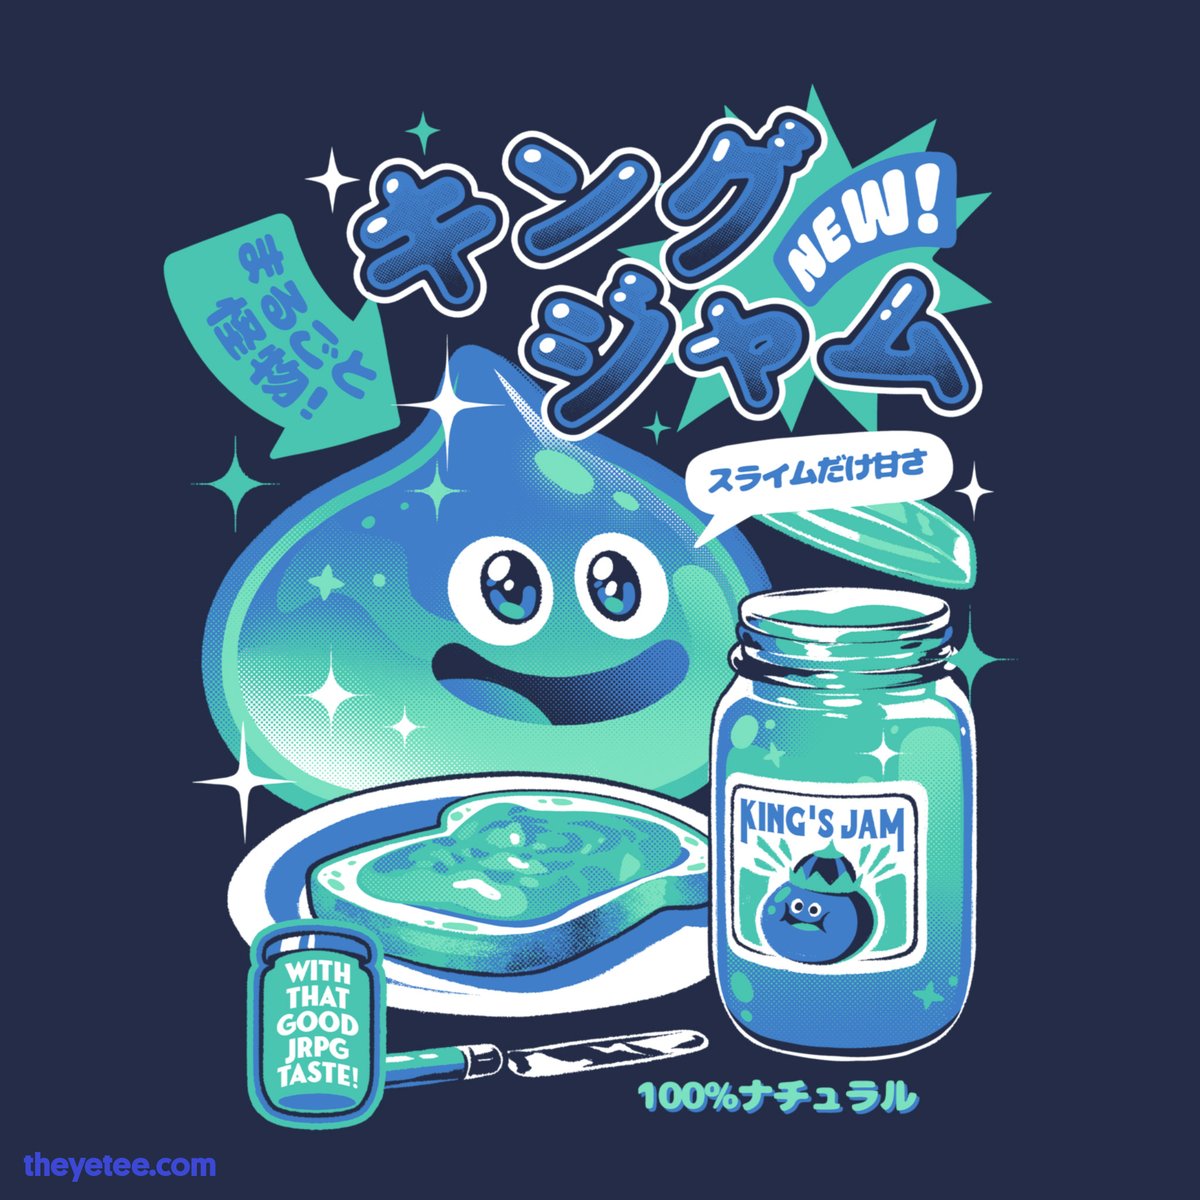 「Keep him away from the peanut butter! De」|The Yetee 🌈のイラスト